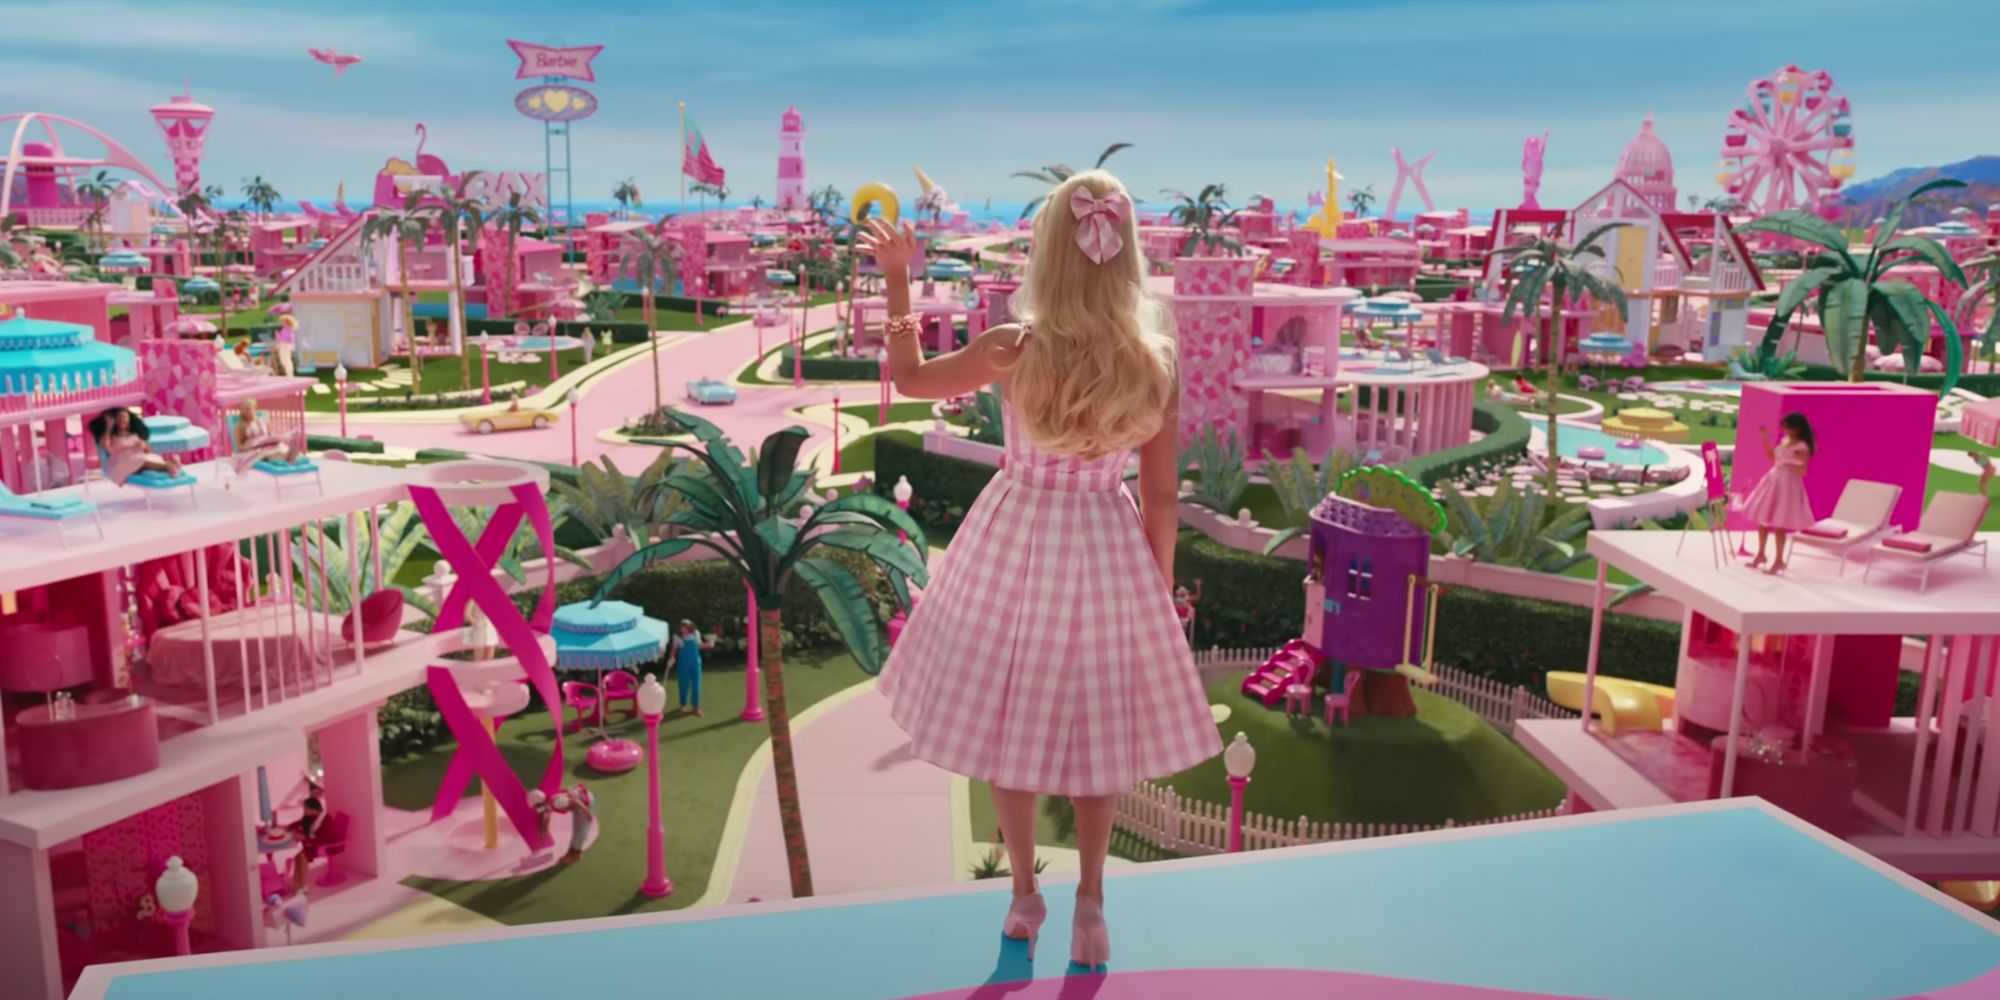 Barbie looking out over Barbieland in a pink plaid dress